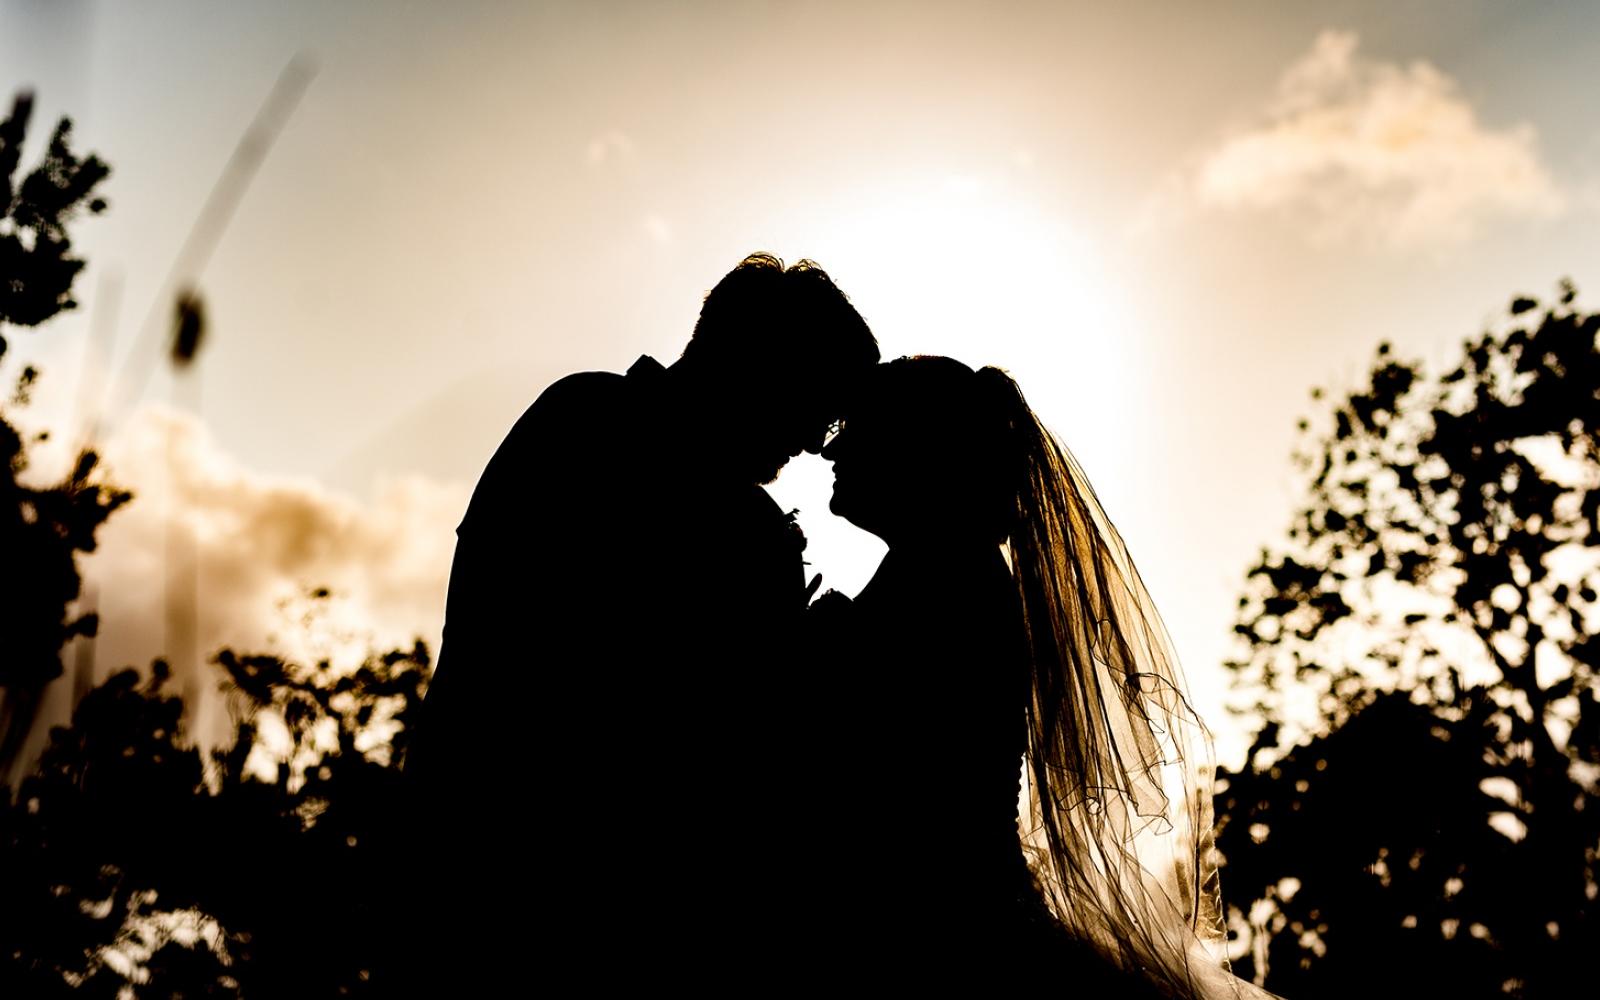 Capture Every Moment Real Wedding Photography Photographer duo Cirencester Hare and Hound Tetbury sunset photographer silhouette of Bride and Groom